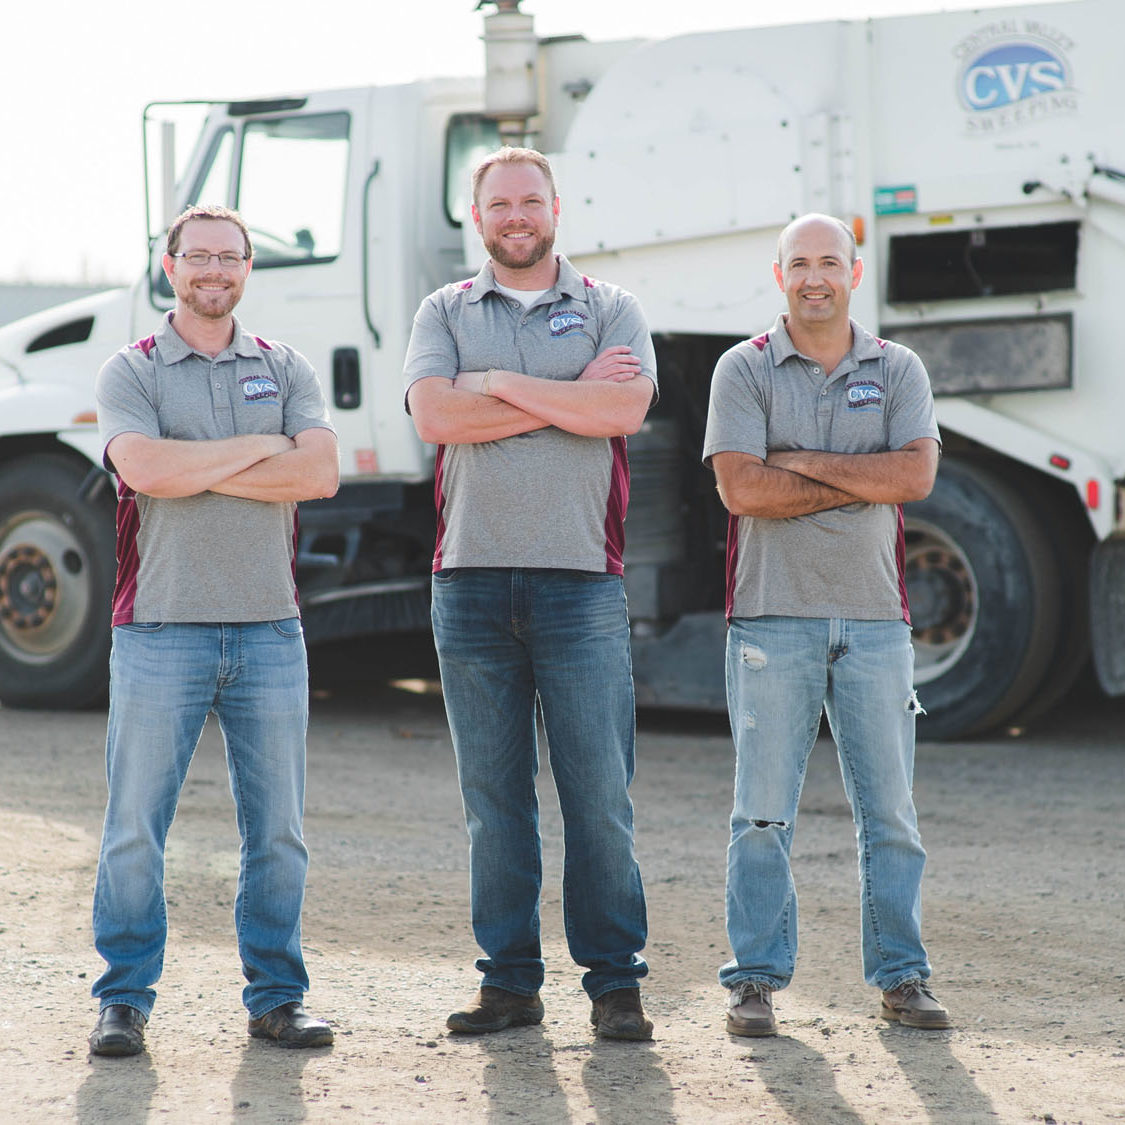 Image: CVS's team. Learn more about our industrial sweeping services.